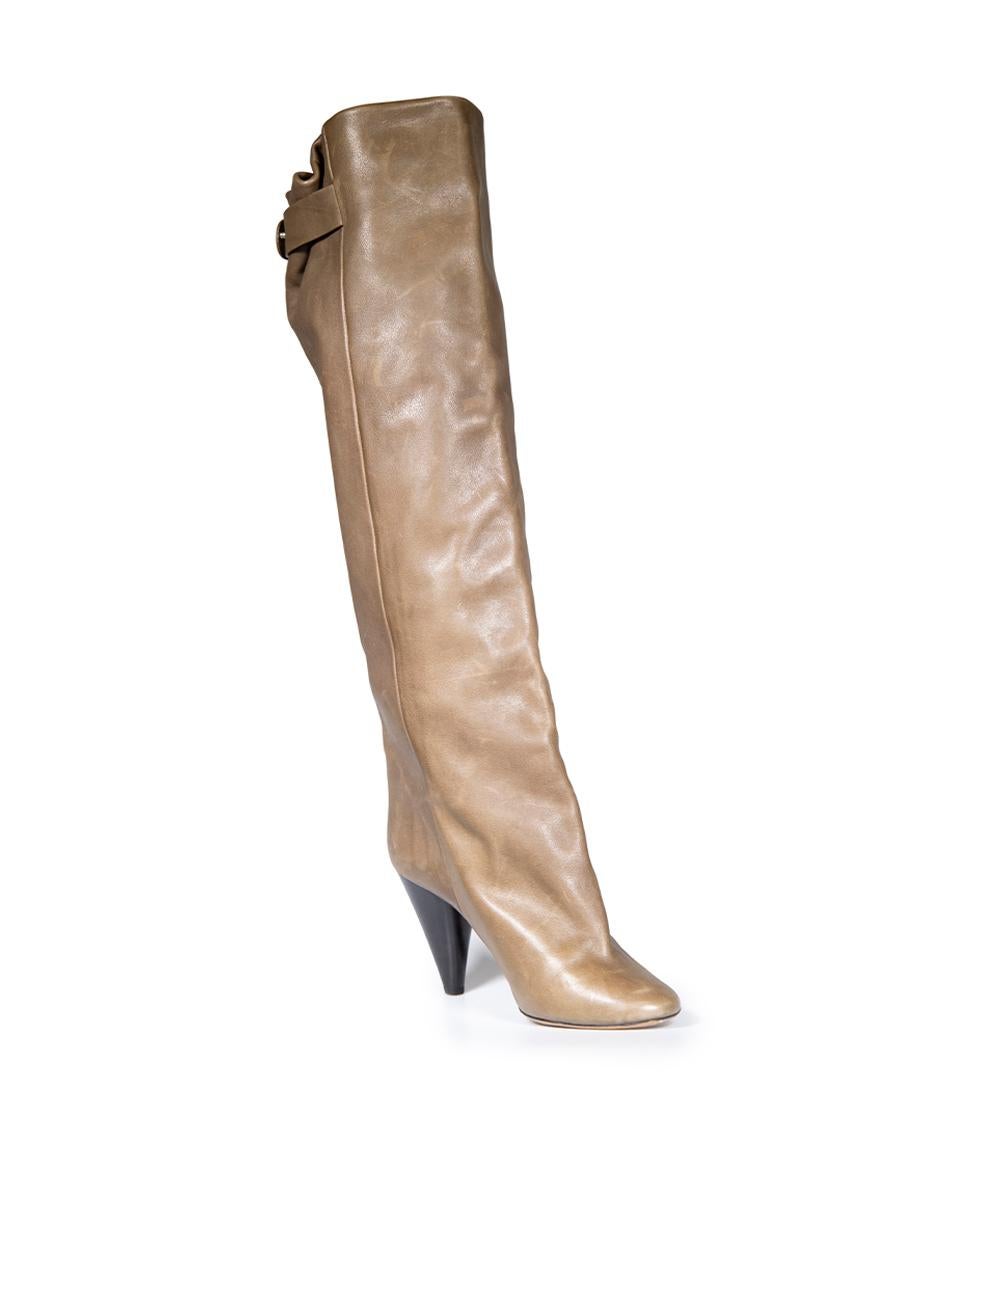 CONDITION is Good. General wear to boots is evident. Moderate signs of wear to both sides, heels, uppers and toes with abrasions to the leather on this used Isabel Marant designer resale item.
 
 Details
 Brown
 Leather
 Boots
 Knee high
 Round toe
